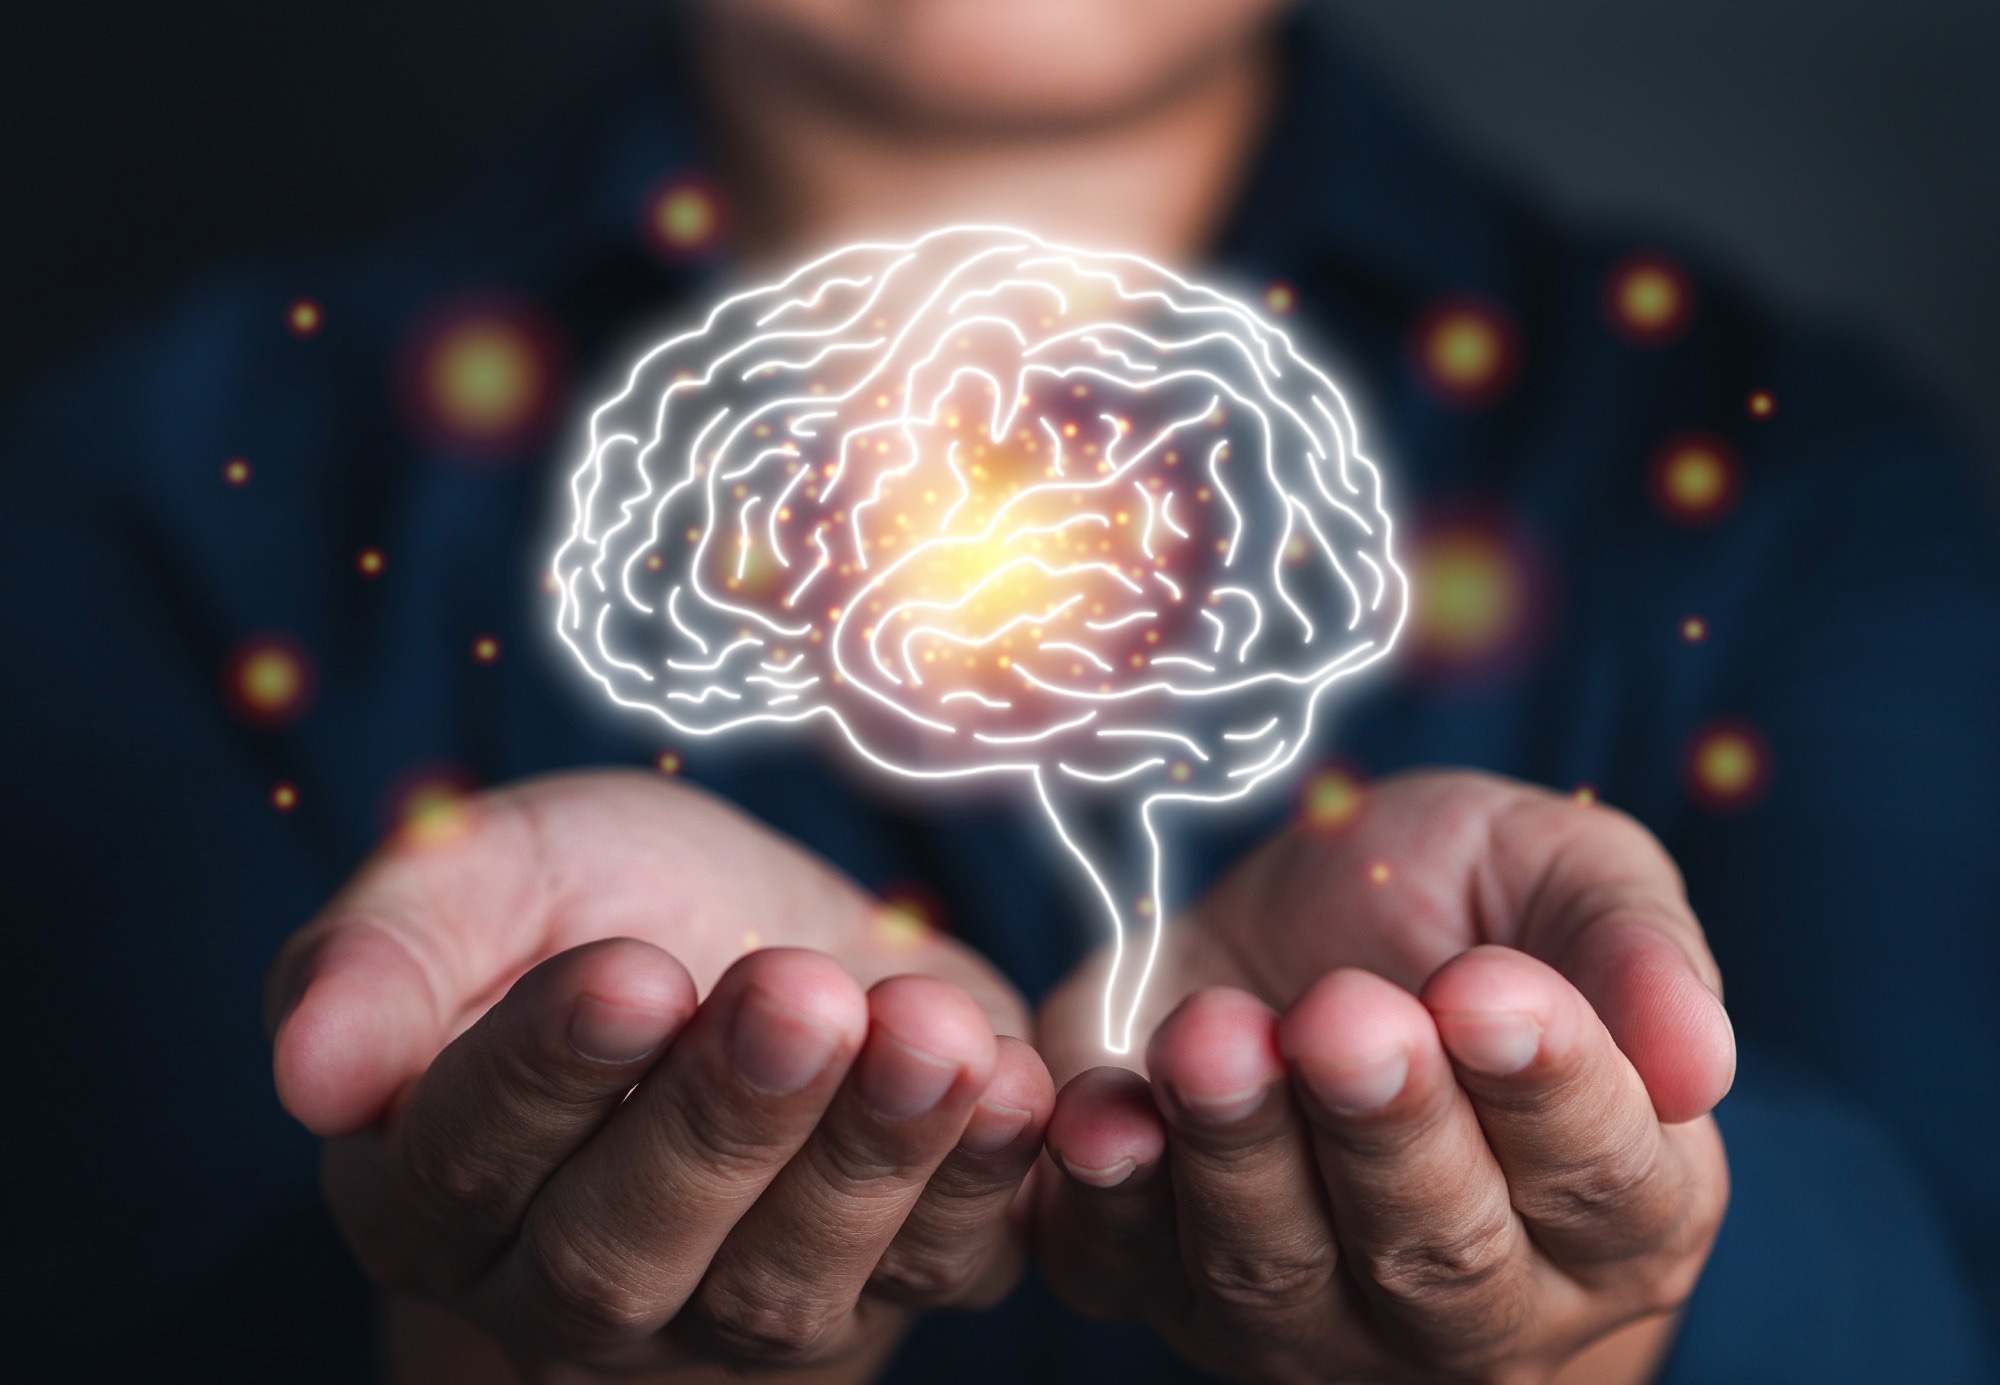 Study: Using AI to measure Parkinson’s disease severity at home. Image Credit: meeboonstudio / Shutterstock